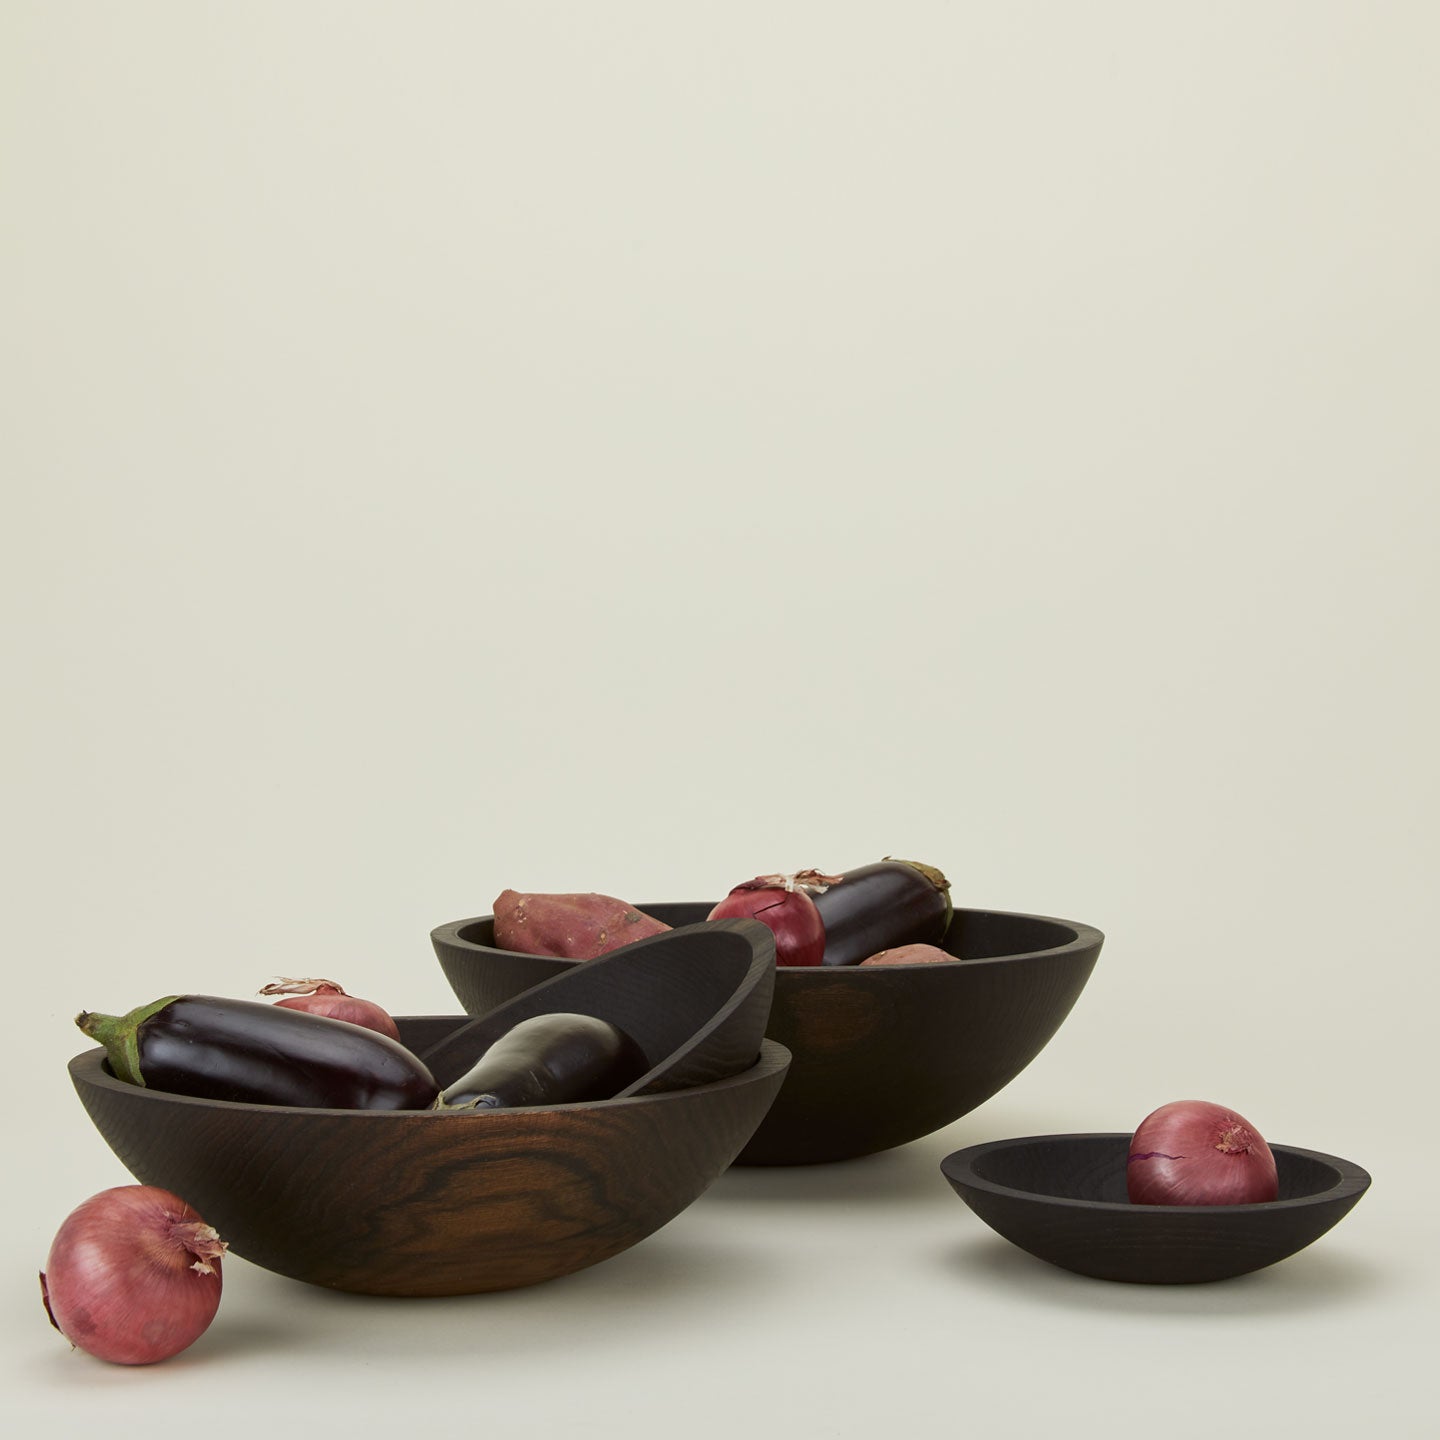 A group of ebonized oak wood bowls in four sizes, with produce.